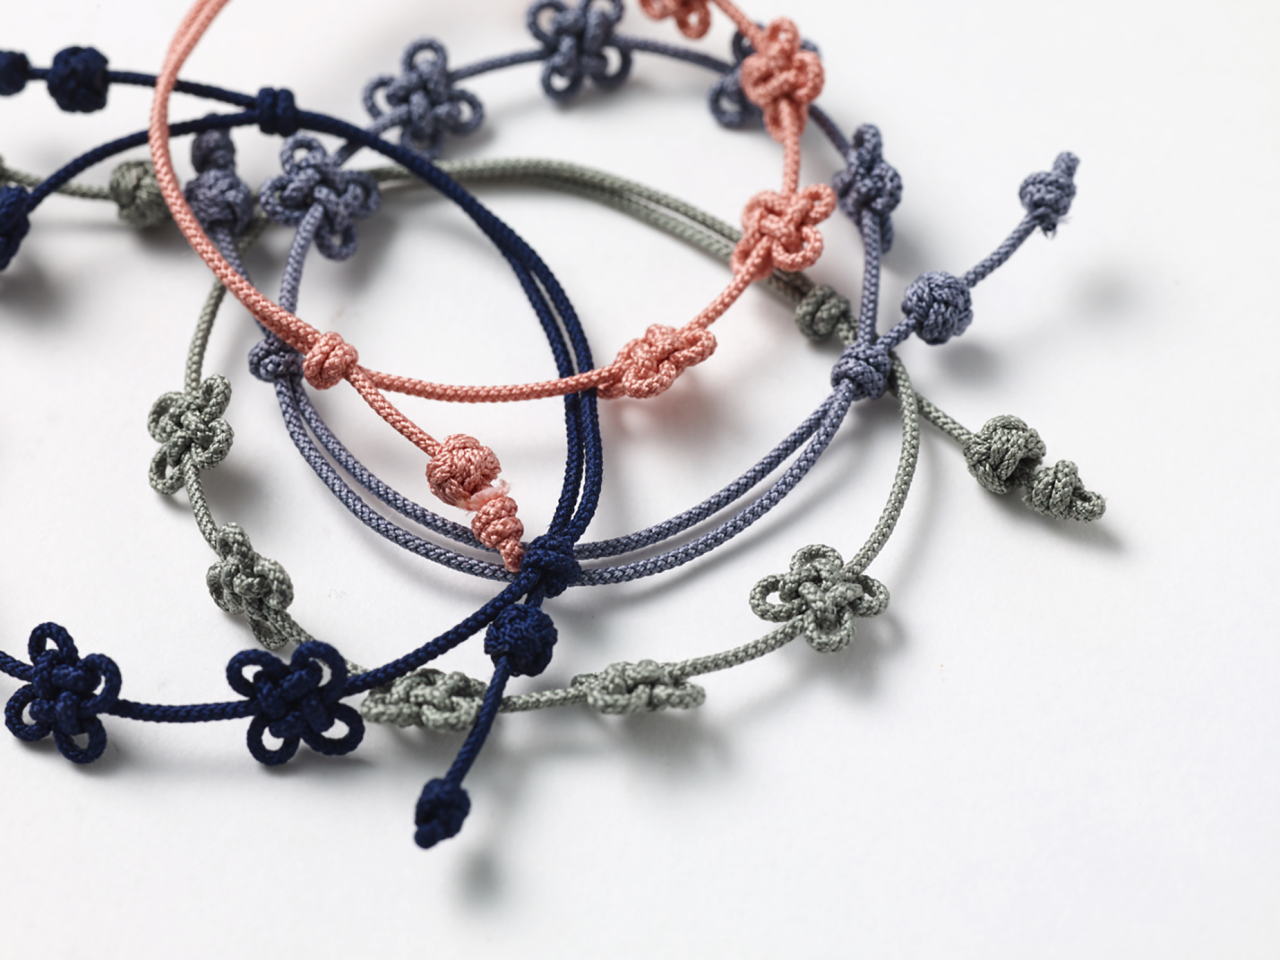 Korean knots, called “maedeup,” created using Chi’s Korean knot kit (Middle Studio)